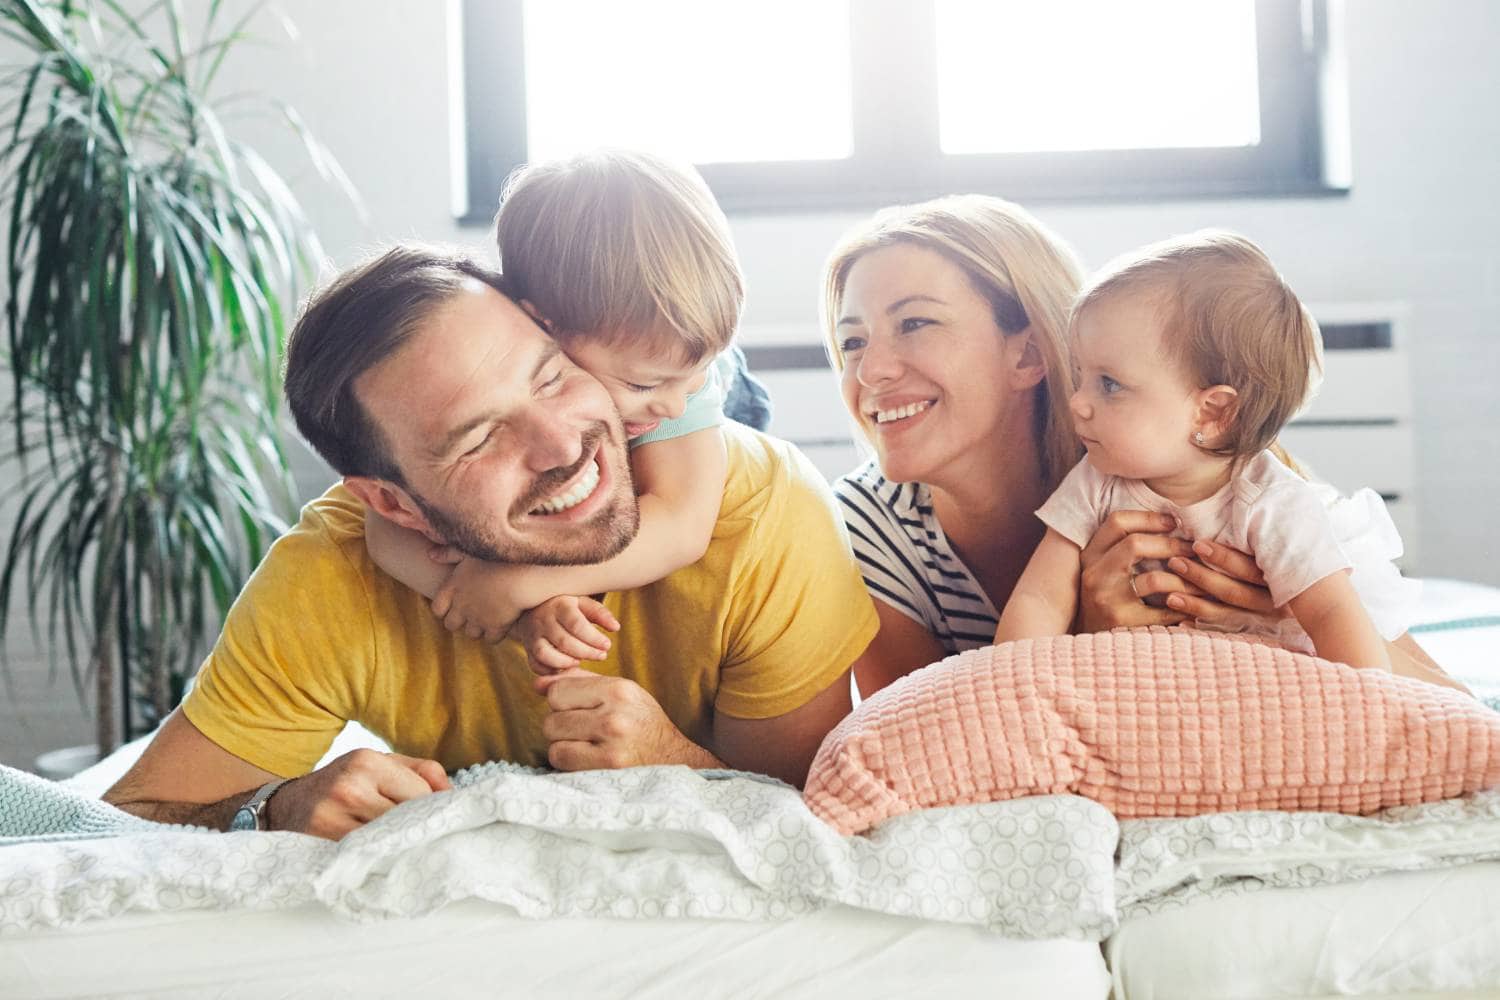 A family is laying on a bed, engaging in estate planning with their children.